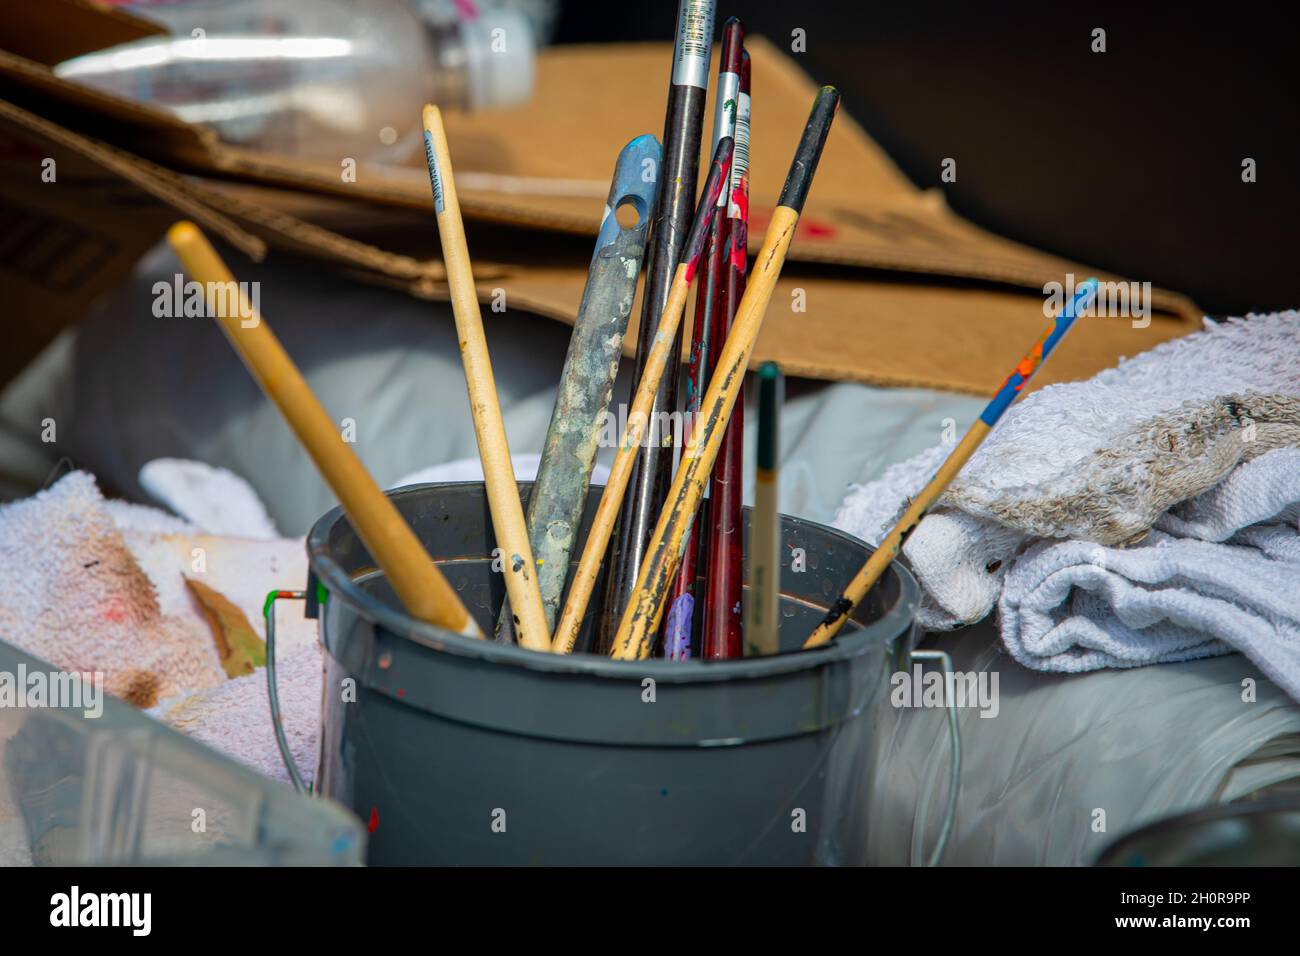 Artist brushes in a container Stock Photo